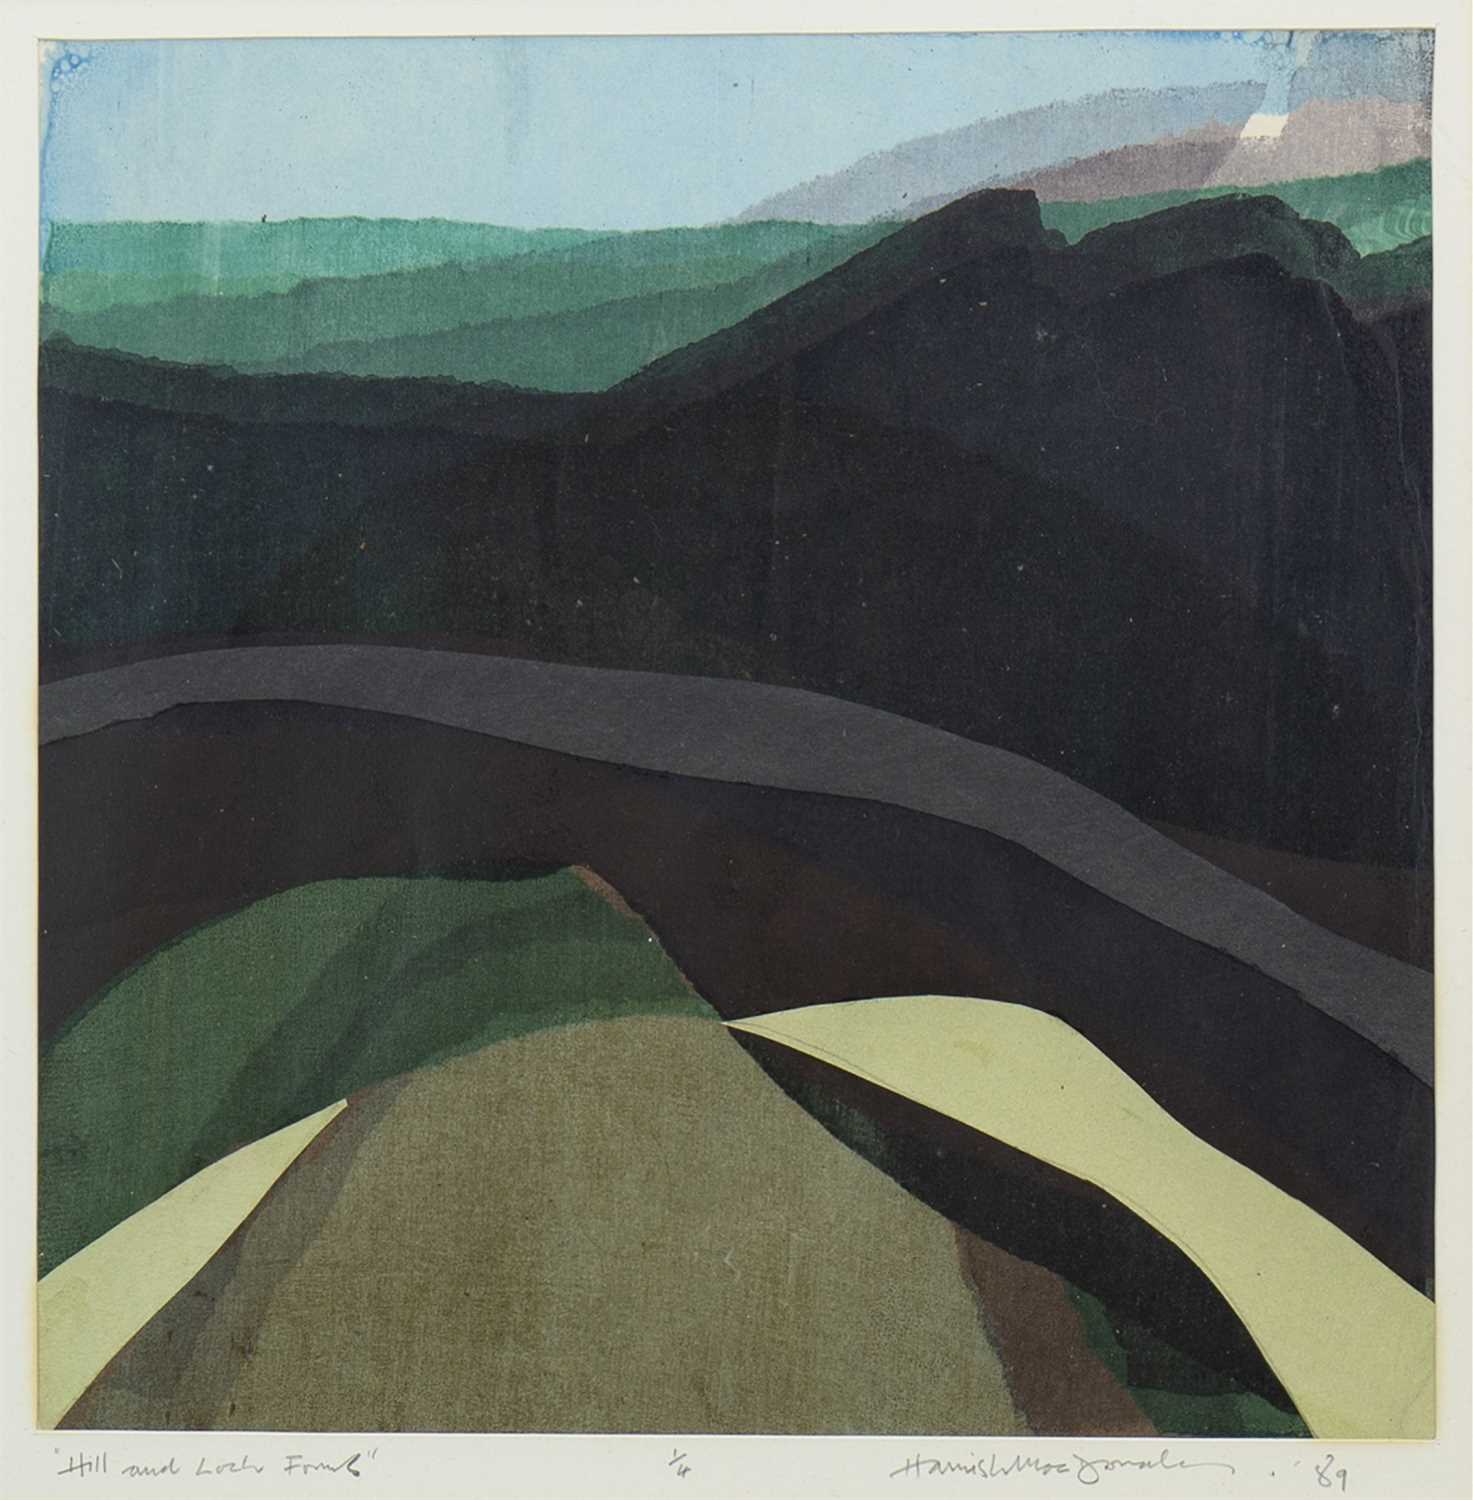 Lot 613 - HILL AND LOCH, A MIXED MEDIA COLLAGE BY HAMISH MACDONALD